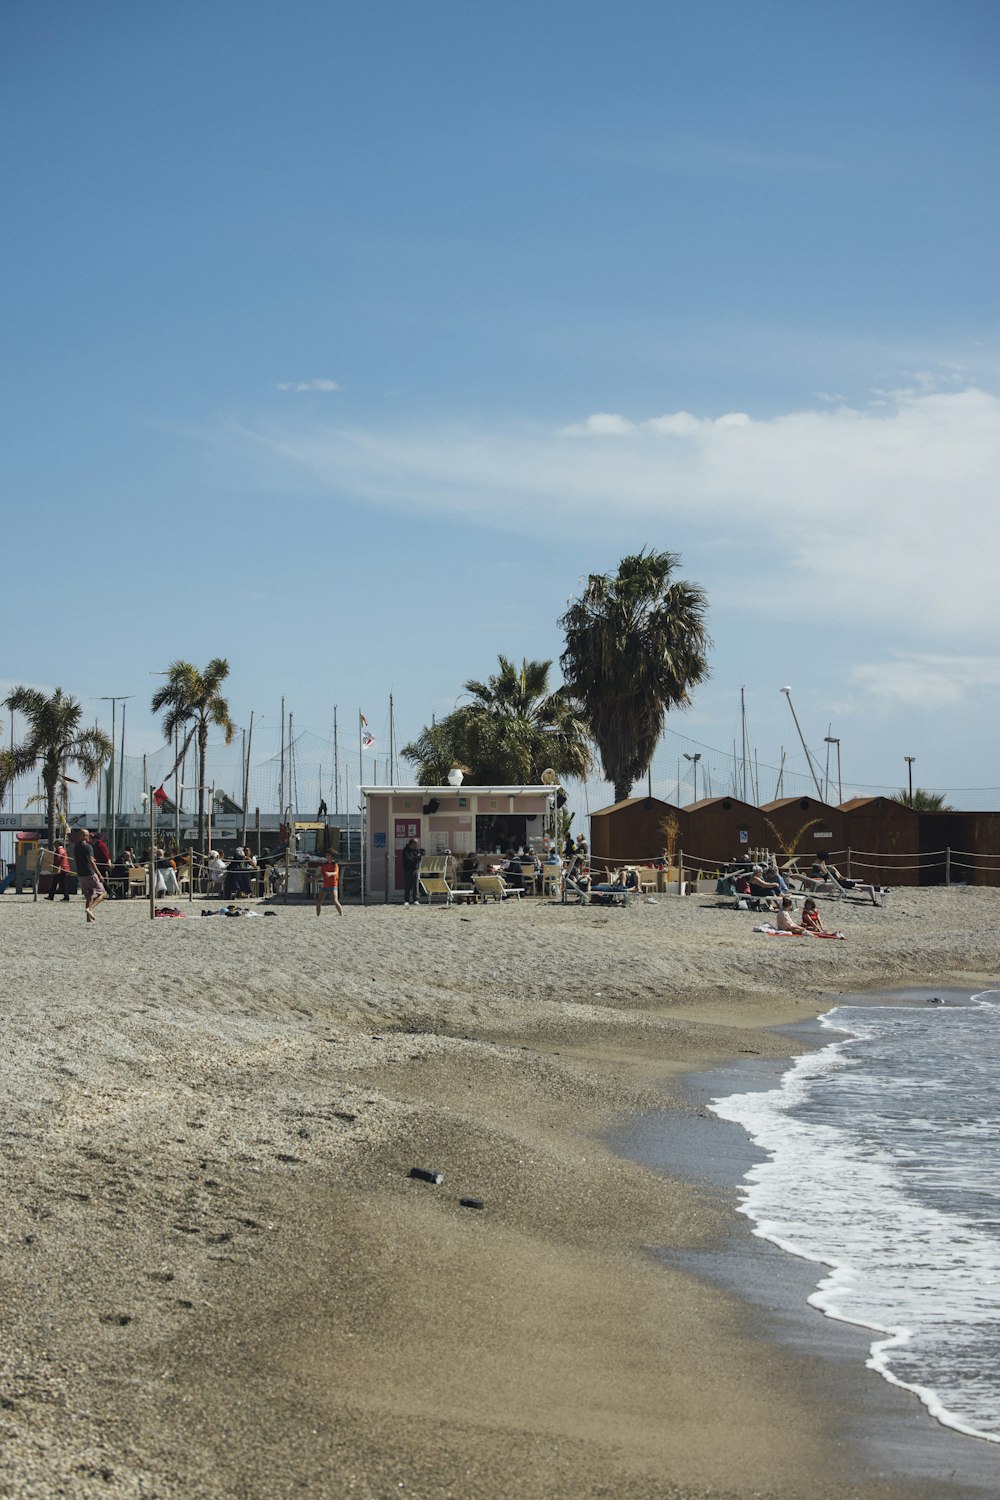 a sandy beach with palm trees and a building in the background